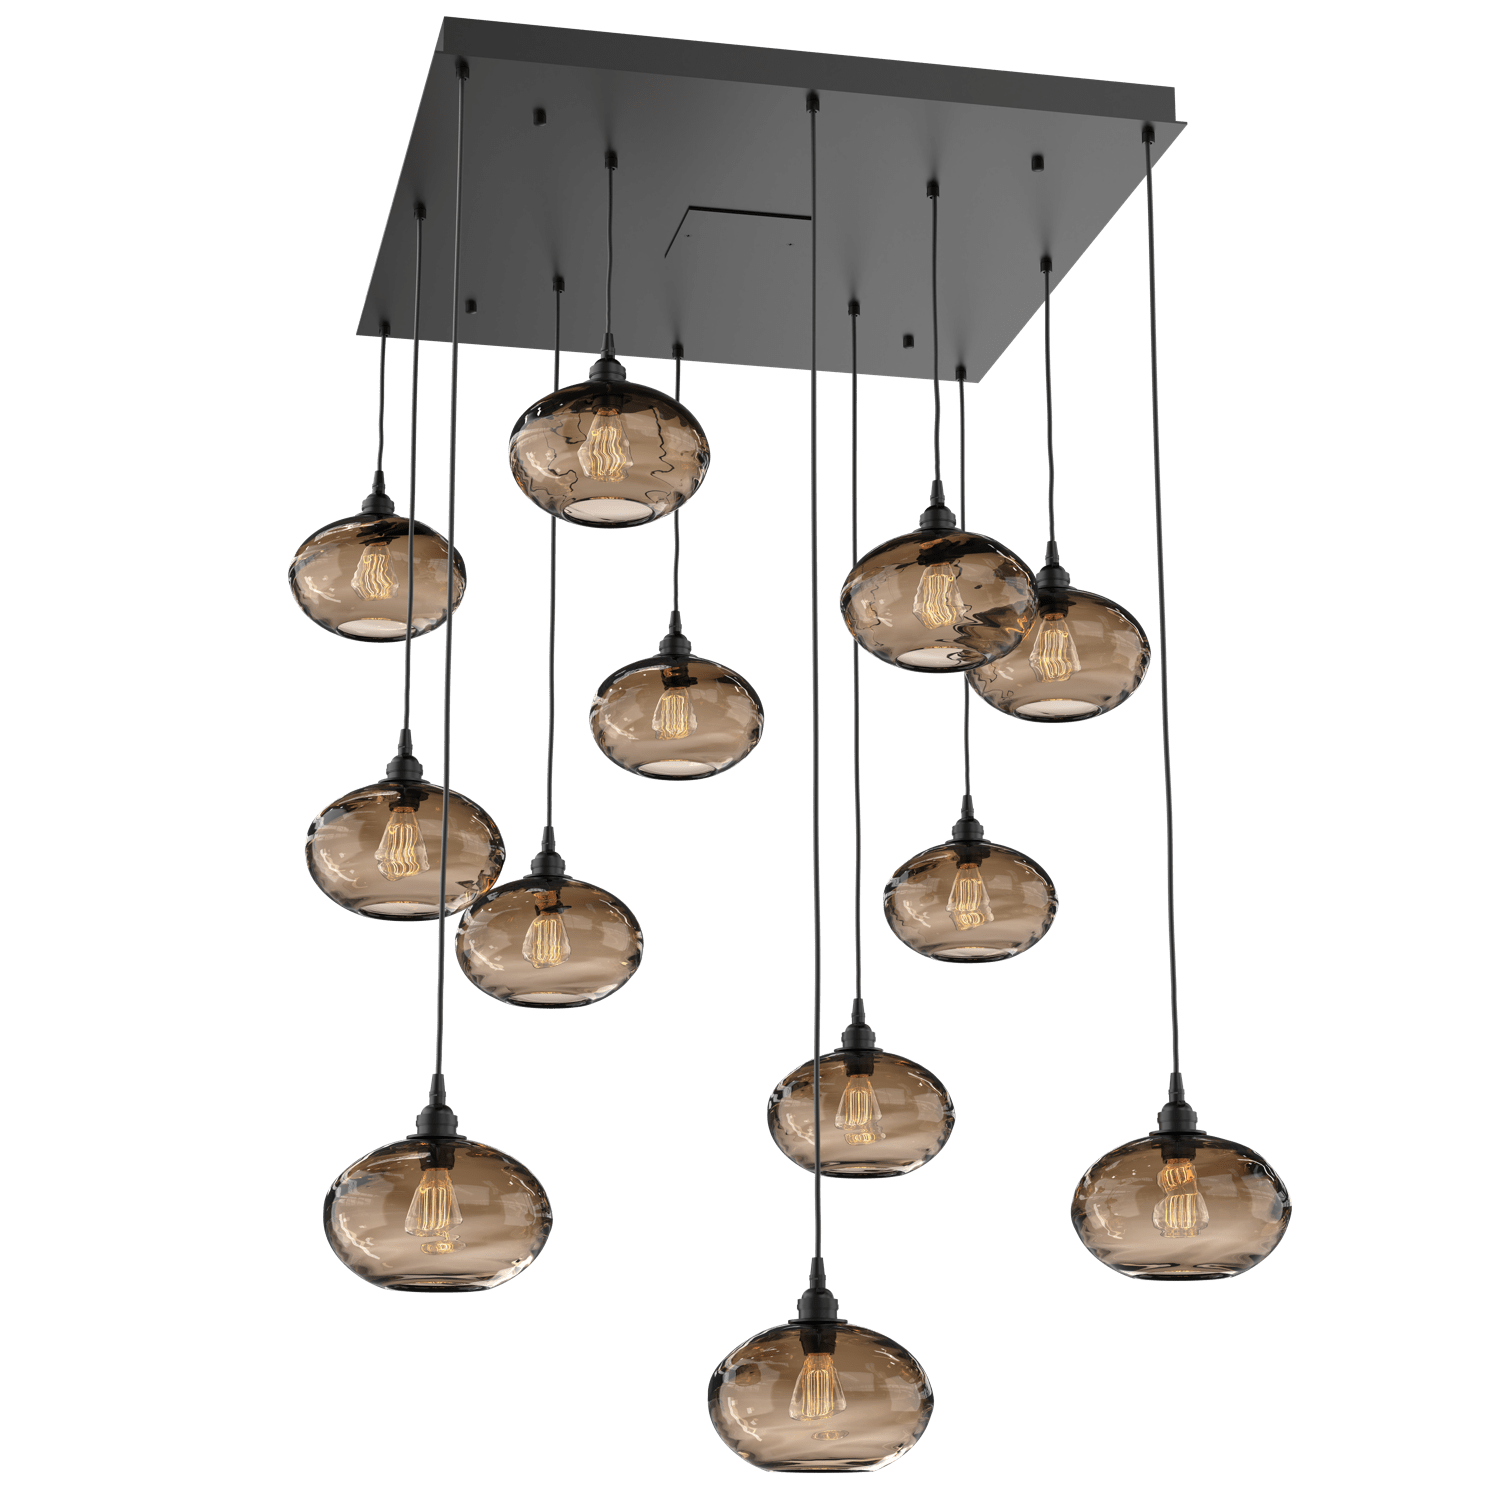 CHB0036-12-MB-OB-Hammerton-Studio-Optic-Blown-Glass-Coppa-12-light-square-pendant-chandelier-with-matte-black-finish-and-optic-bronze-blown-glass-shades-and-incandescent-lamping